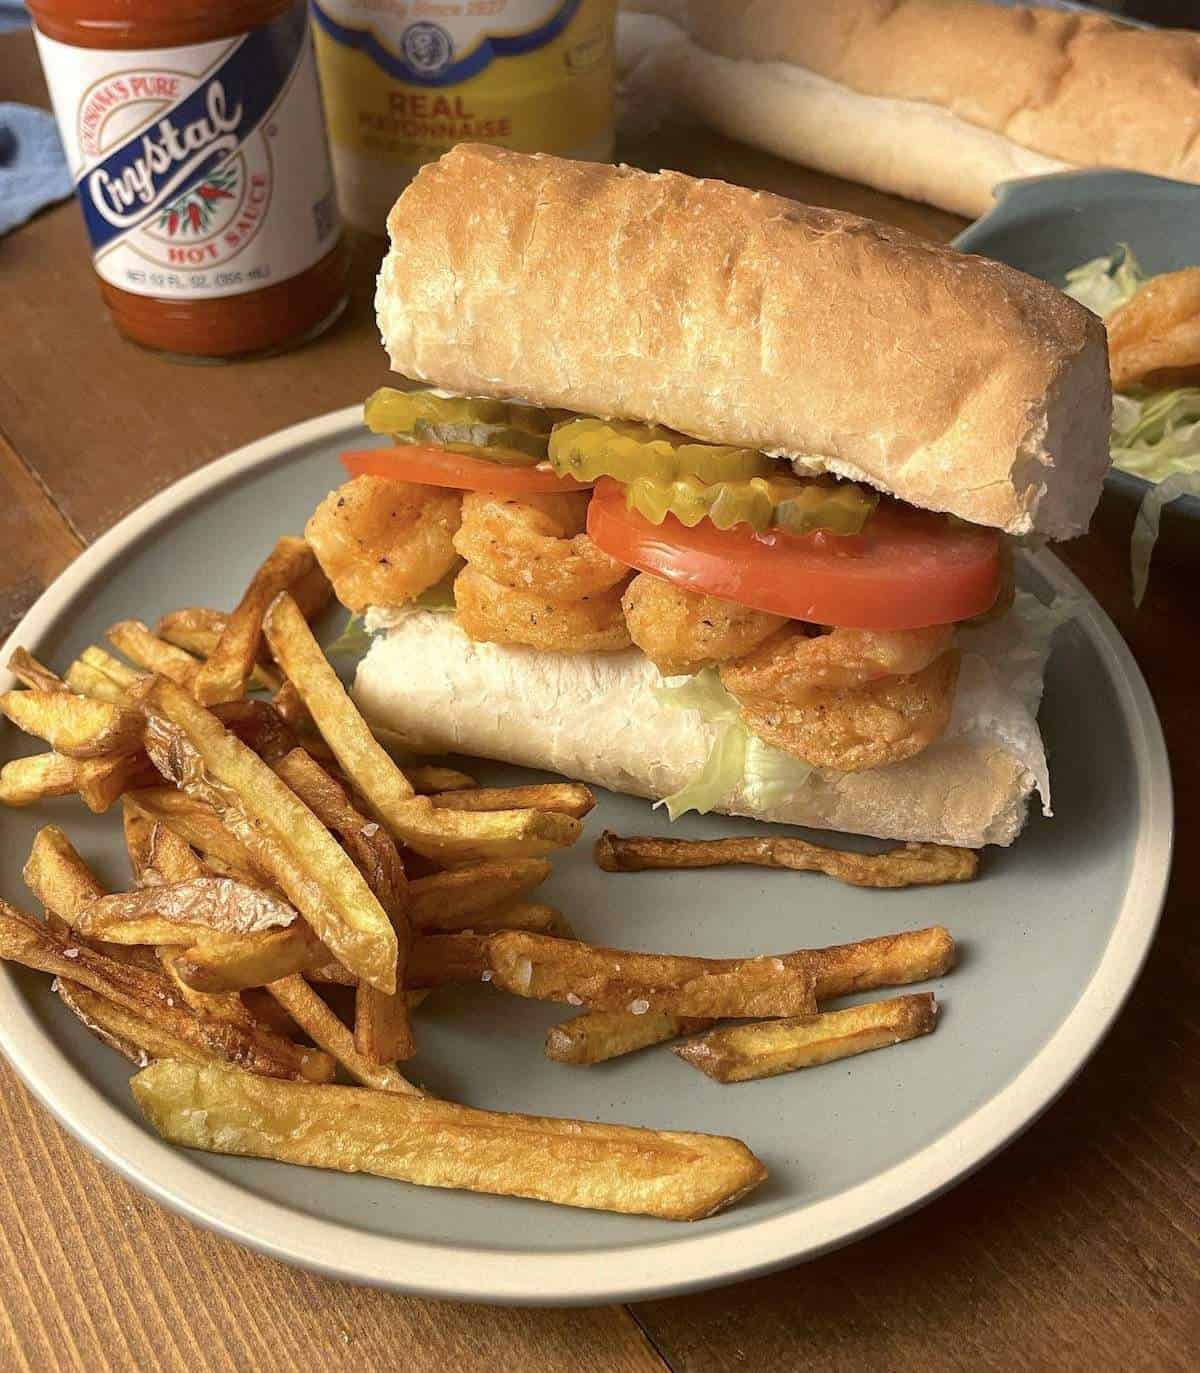 A fully dressed fried shrimp po boy on a blue plate with french fries.